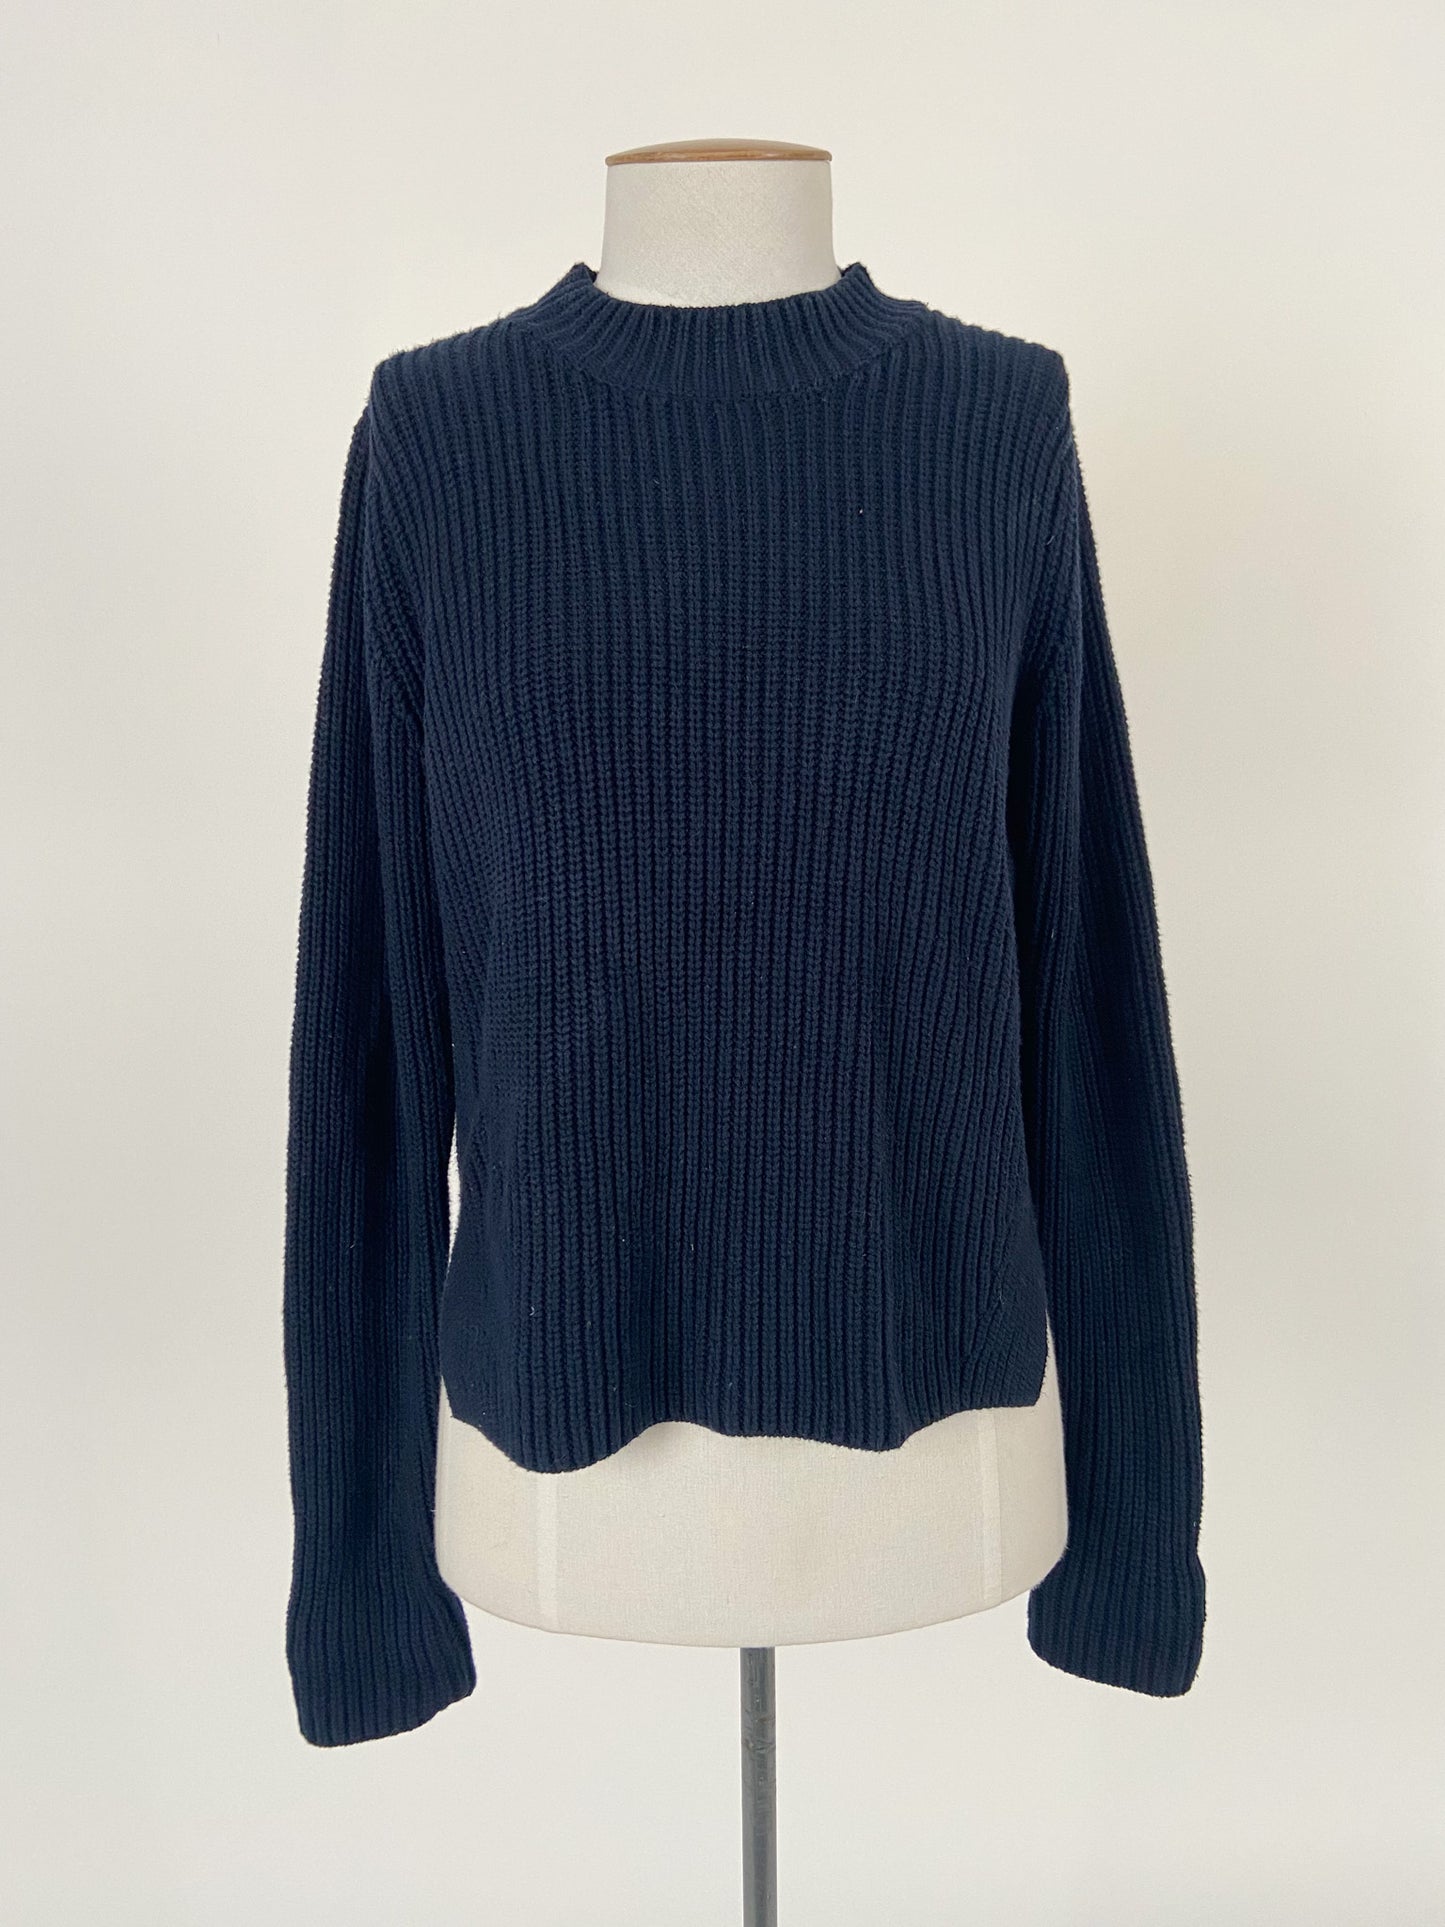 Glassons | Navy Casual/Workwear Jumper | Size M